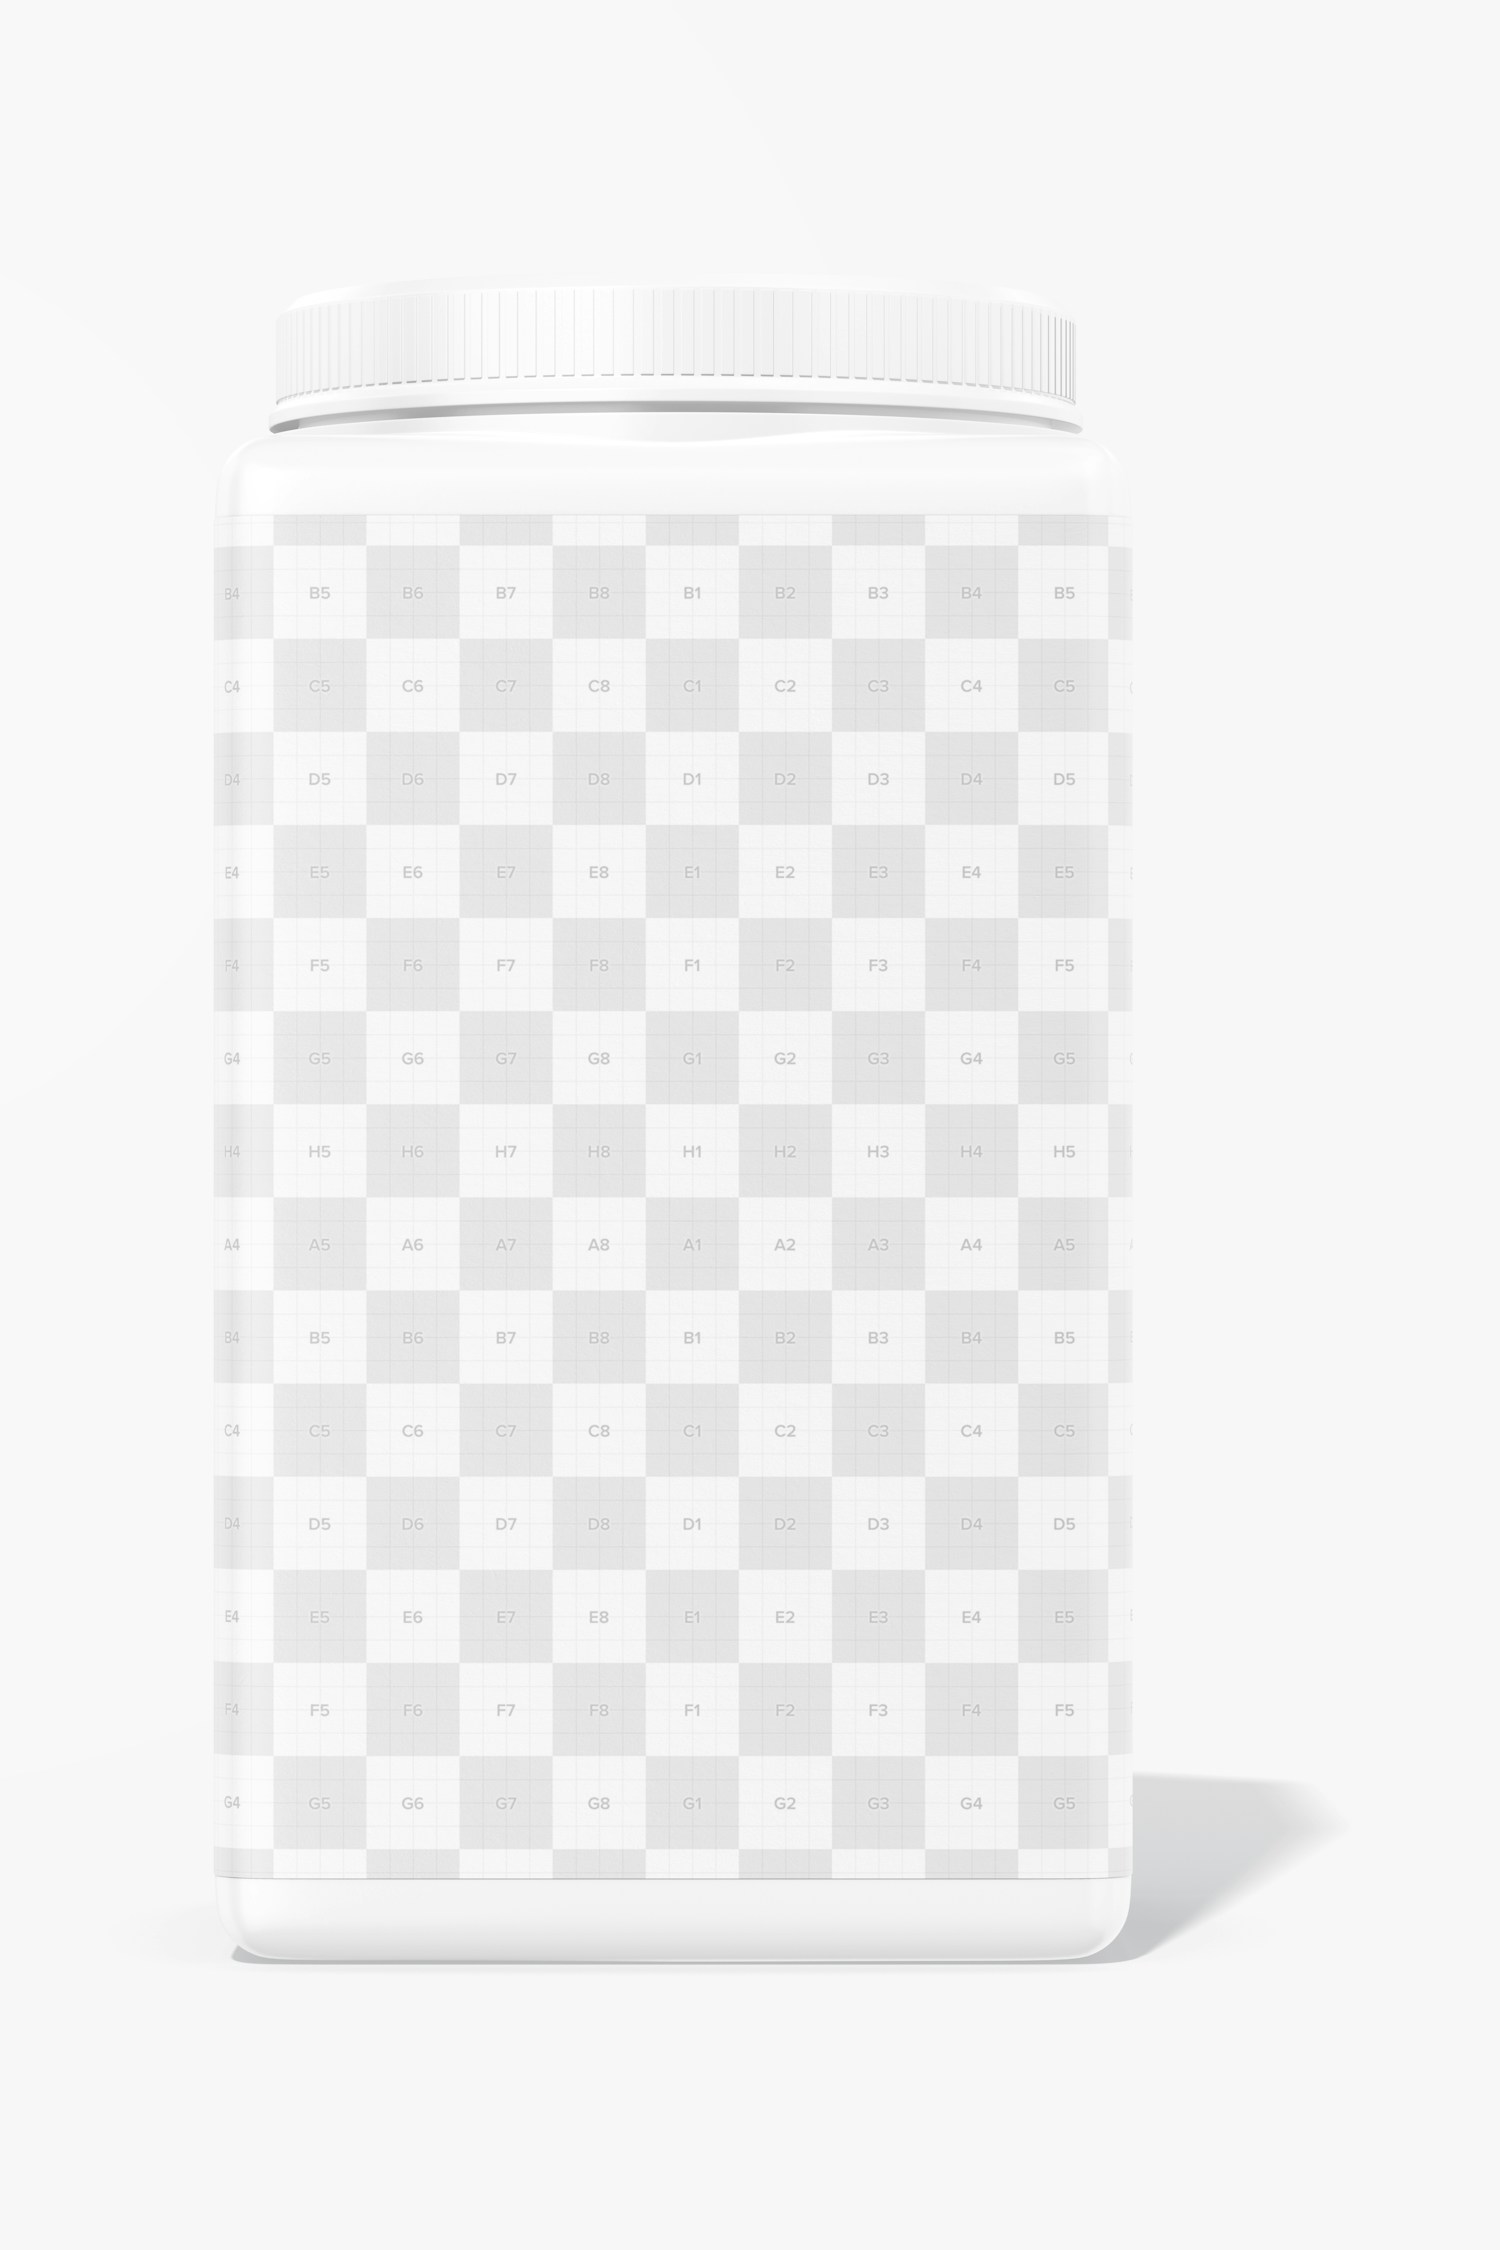 Square Protein Powder Container Mockup, Front View